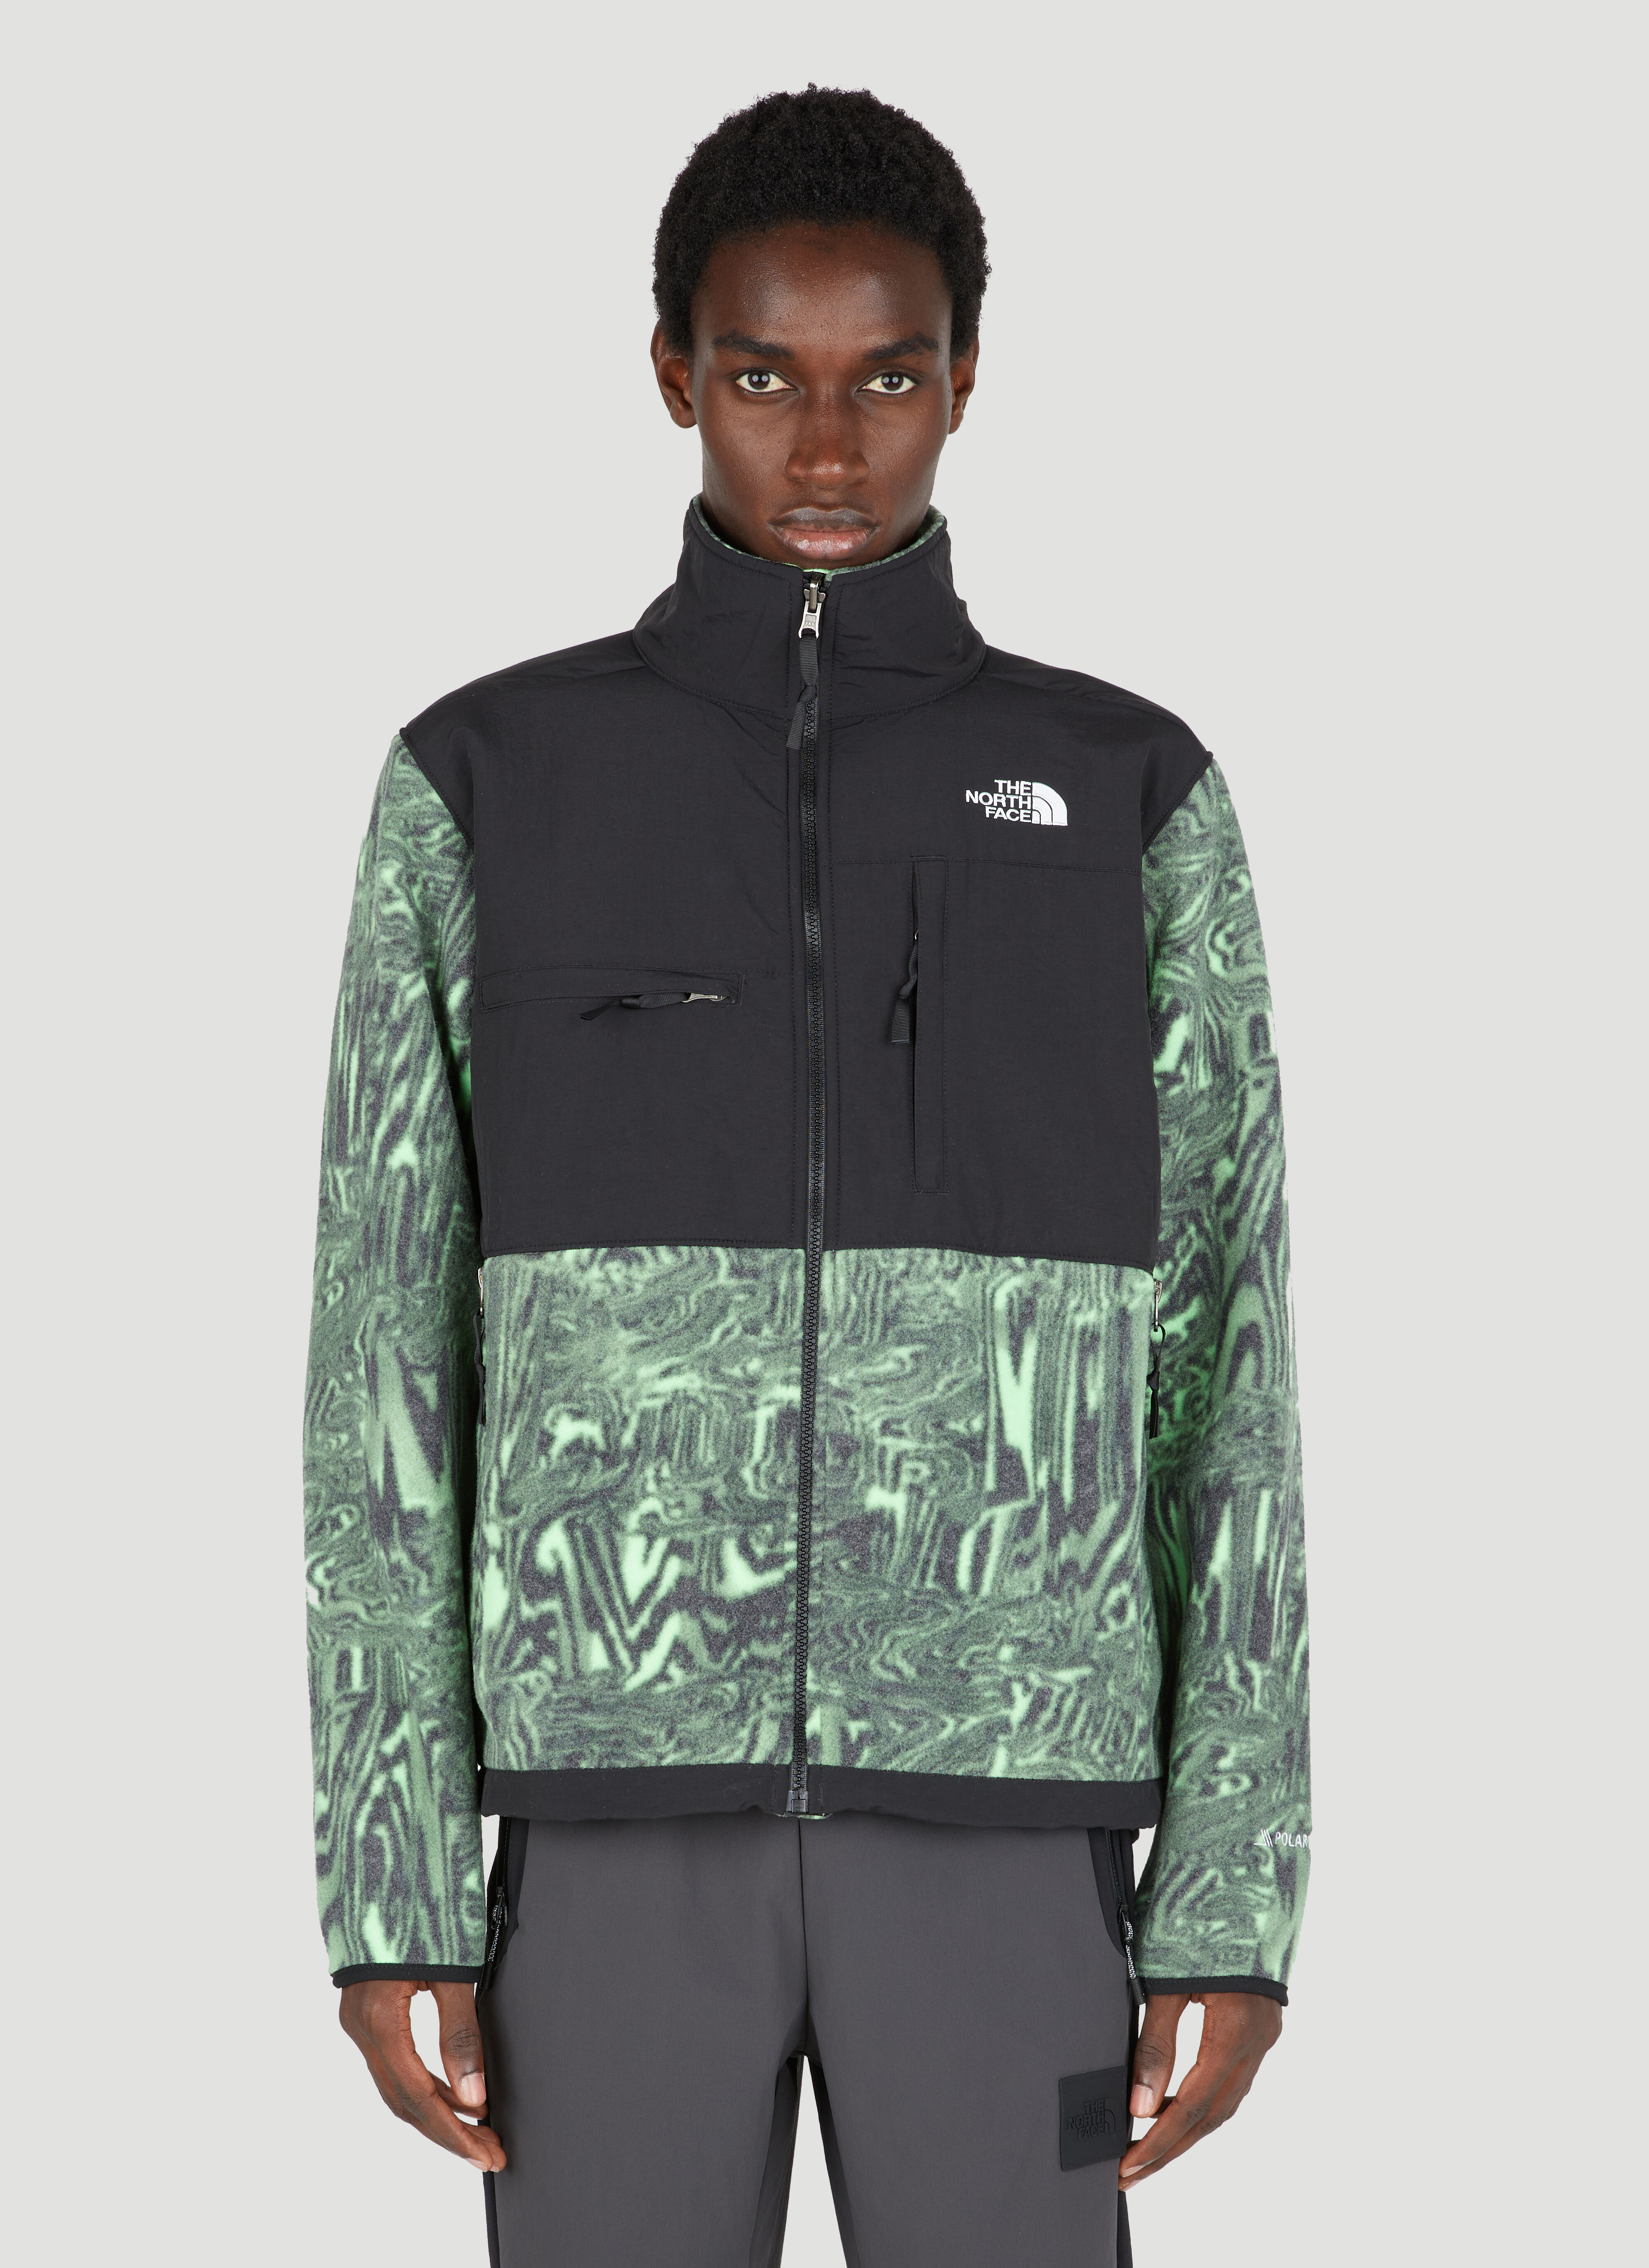 The North Face Denali Jacket with Graphic Print Black tnf0156020